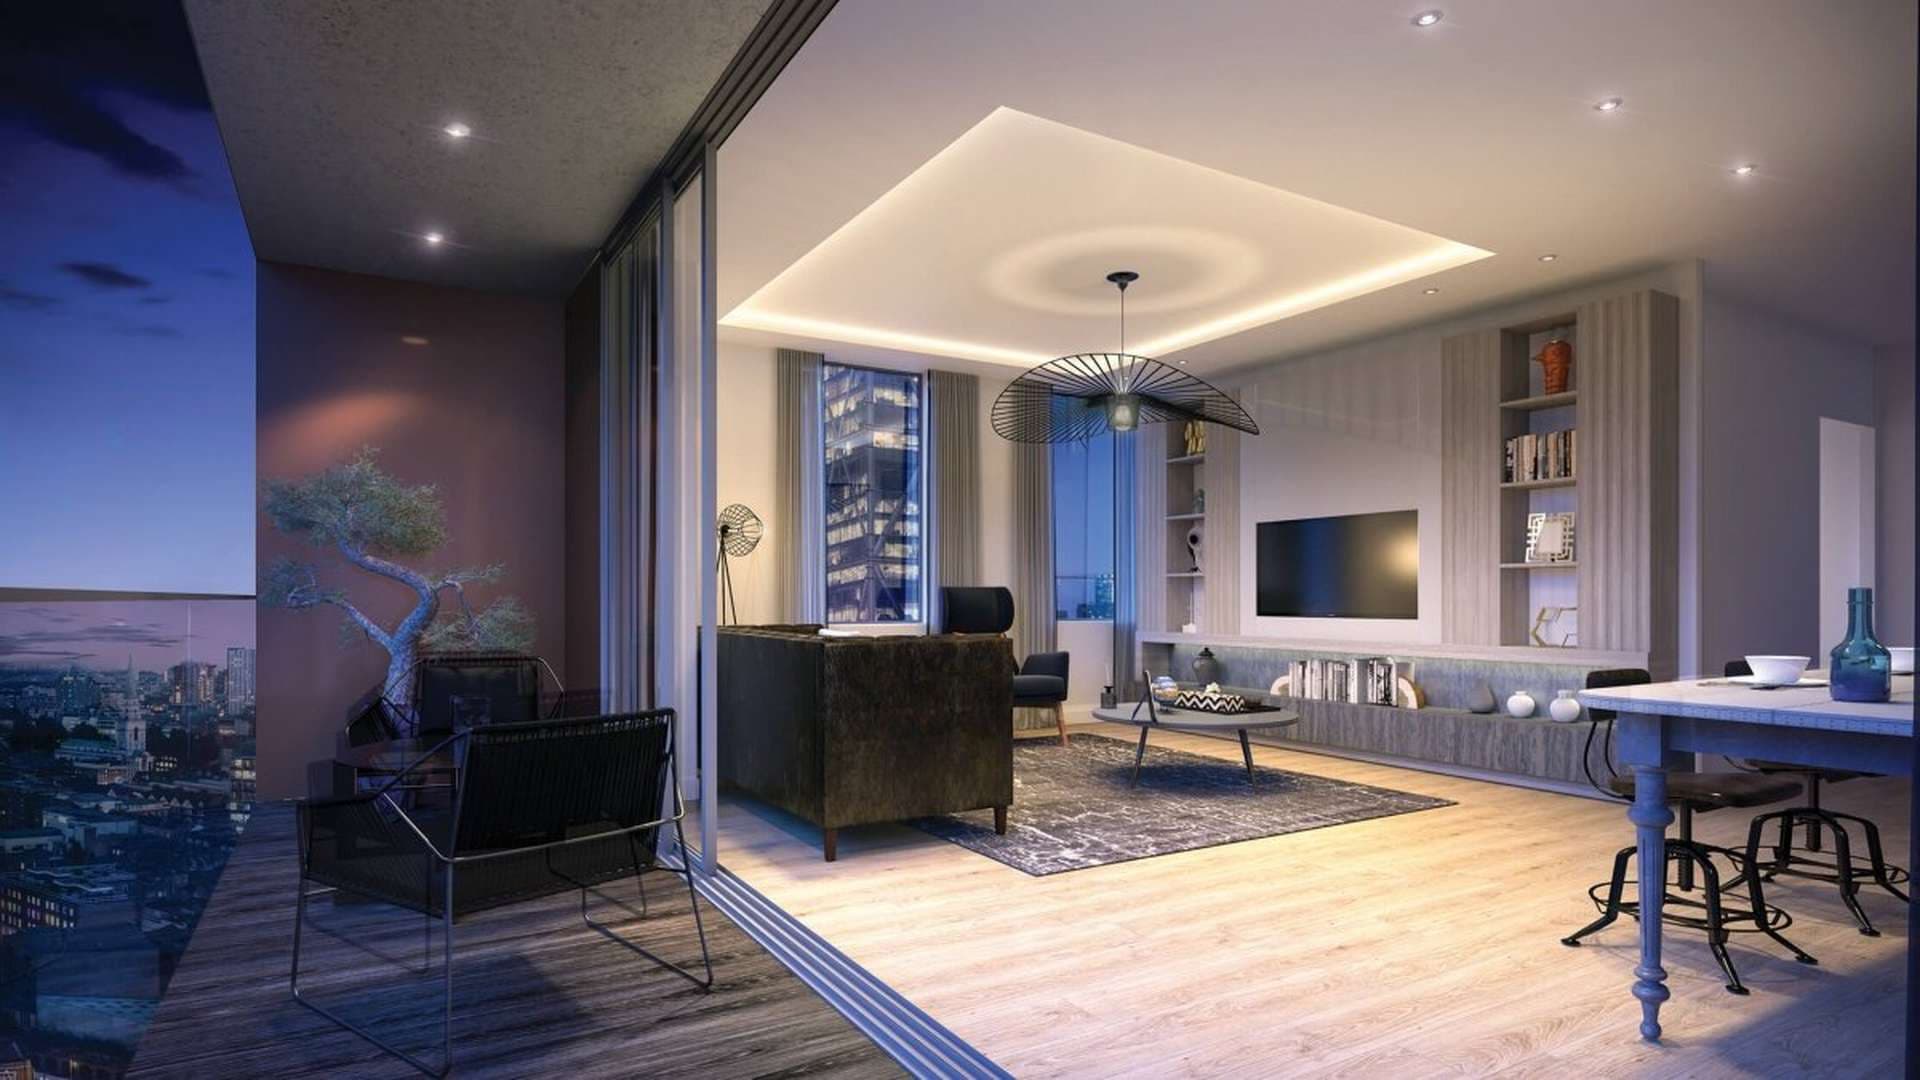 3 Bedroom Apartment For Sale The Stage Lp02574 11ec54d976541000.jpg